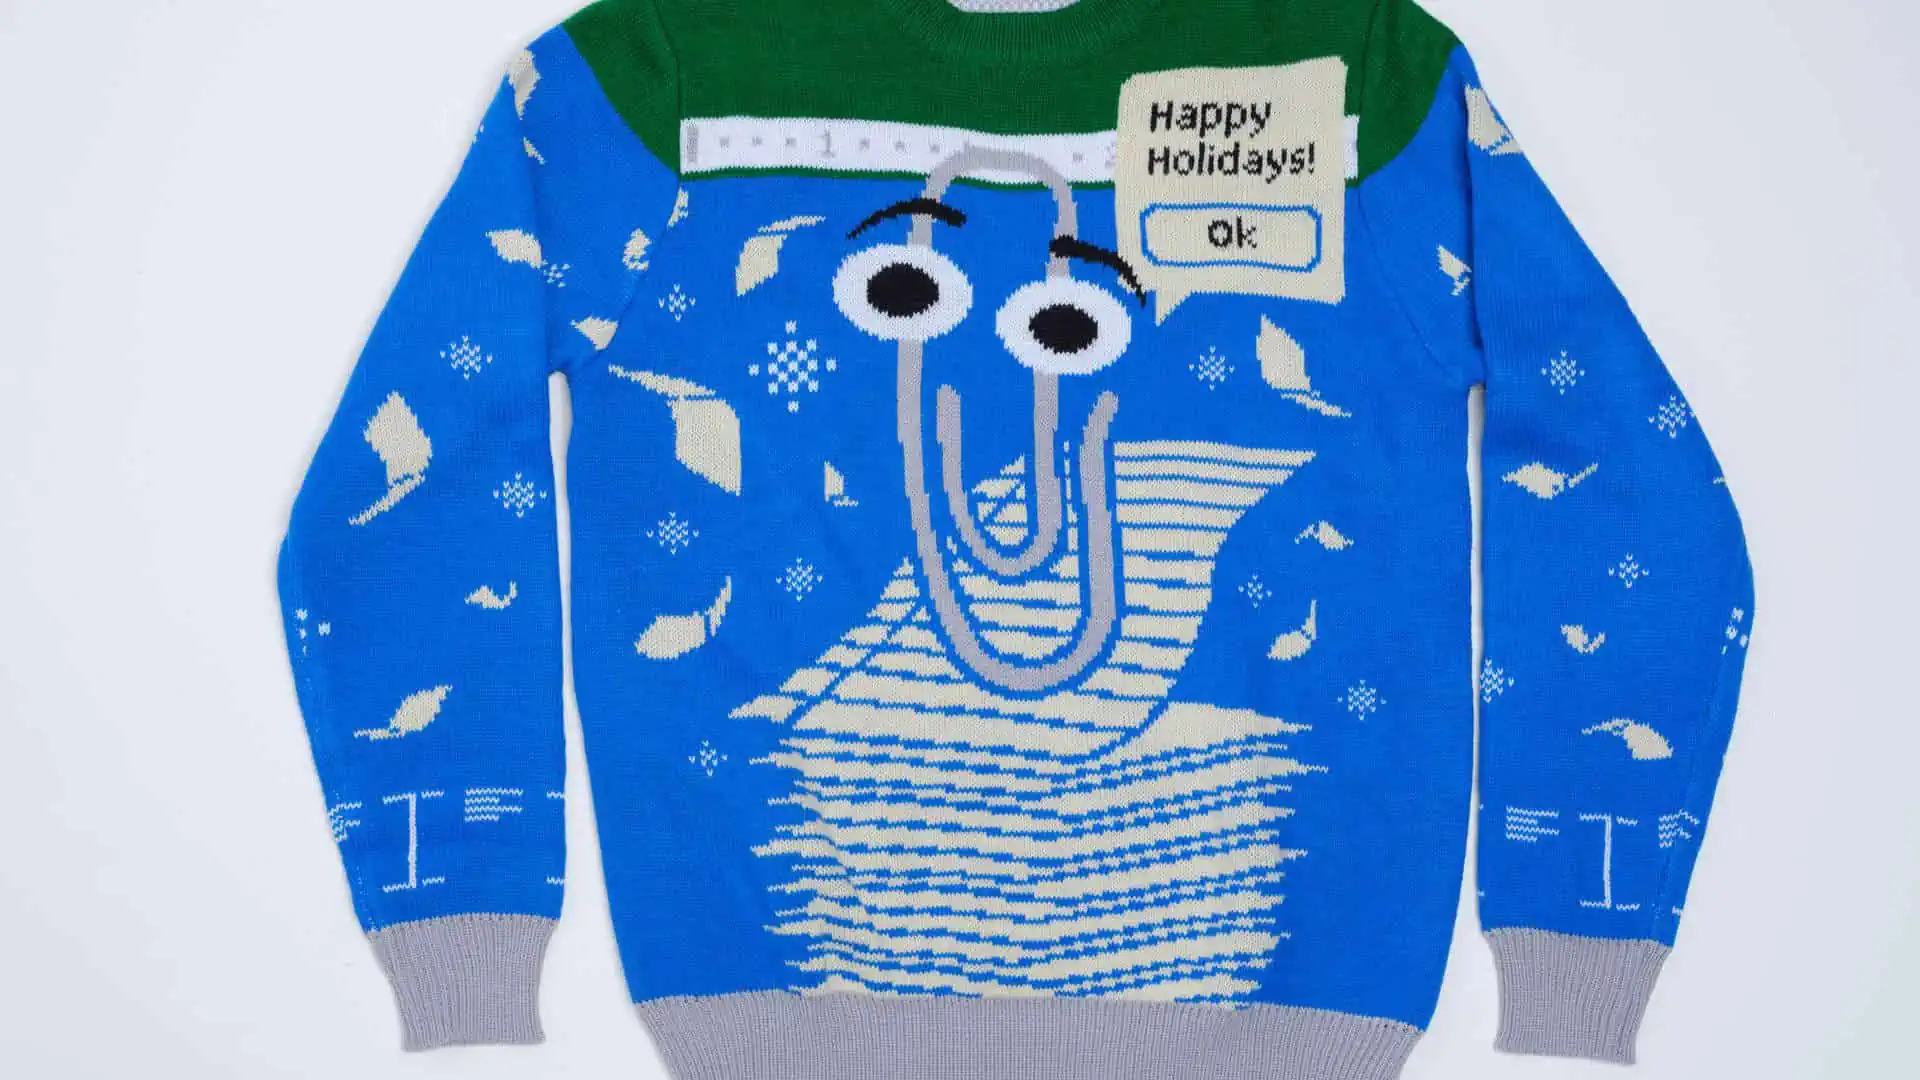 2022 Windows Ugly Sweater featuring Clippy